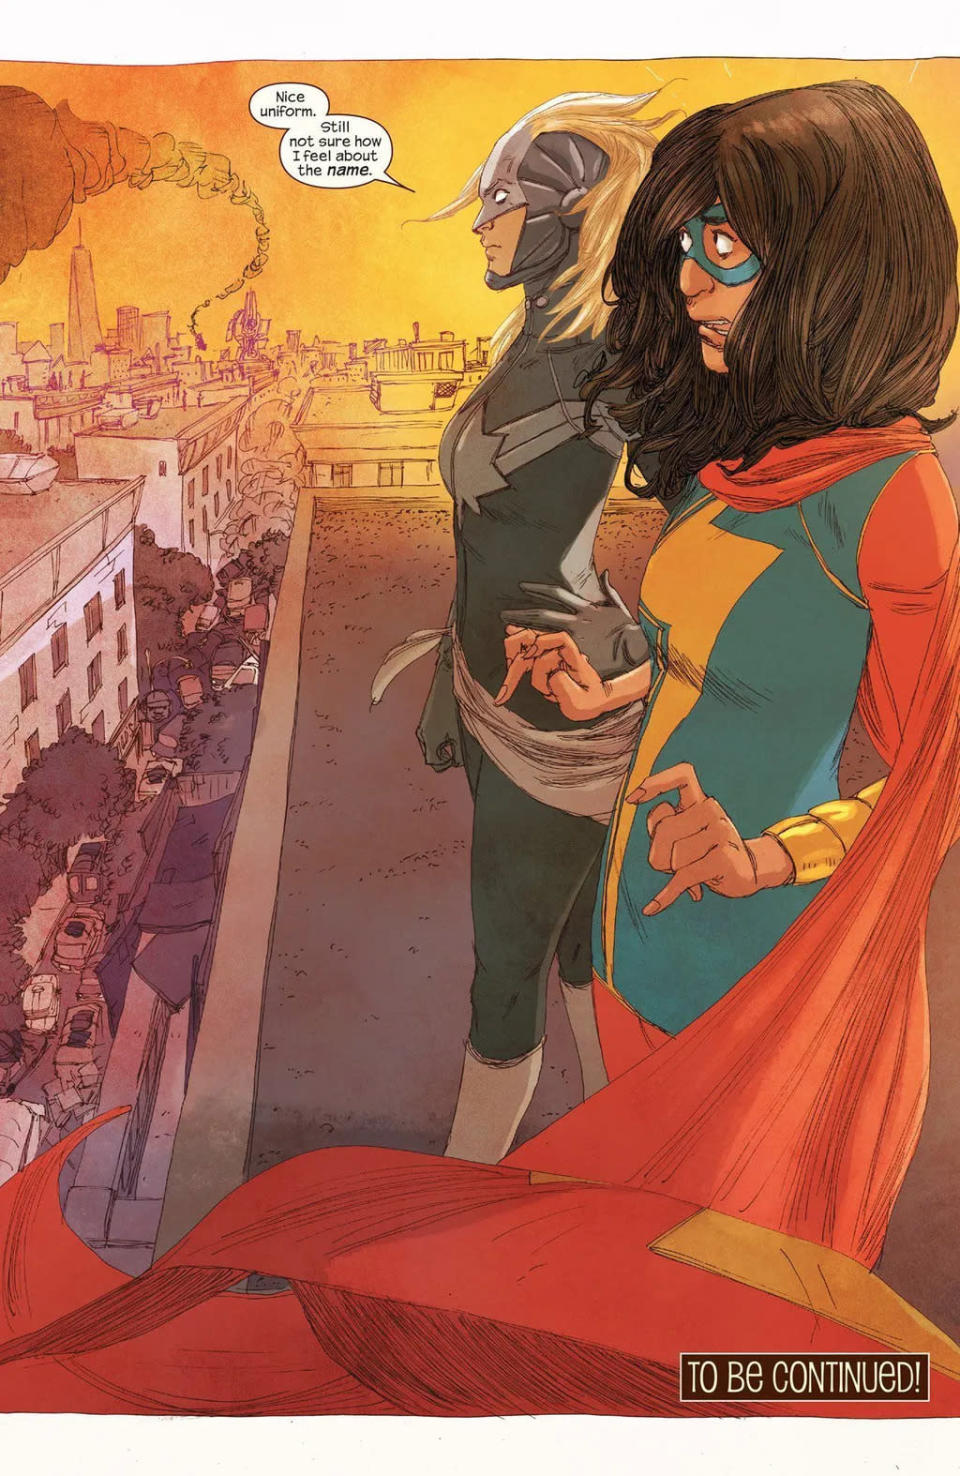 You can be sure: Ms. Marvel will soon meet Captain Marvel (Image: Handout/Marvel Comics)